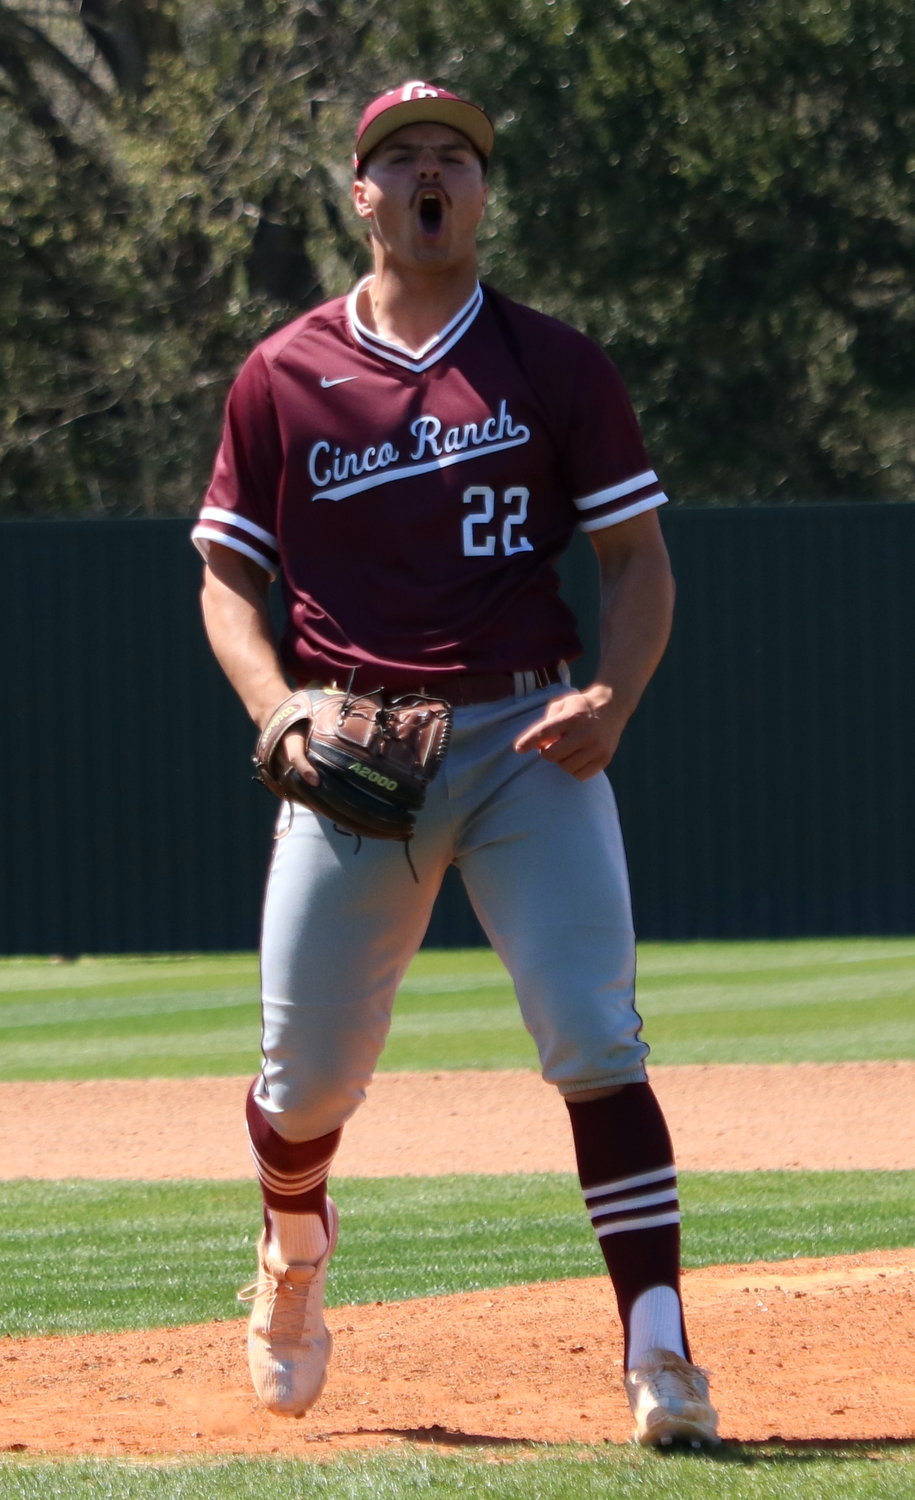 Blake Hansen celebrates after getting out of a jam during Friday’s game between Katy and Cinco Ranch at the Katy baseball field.